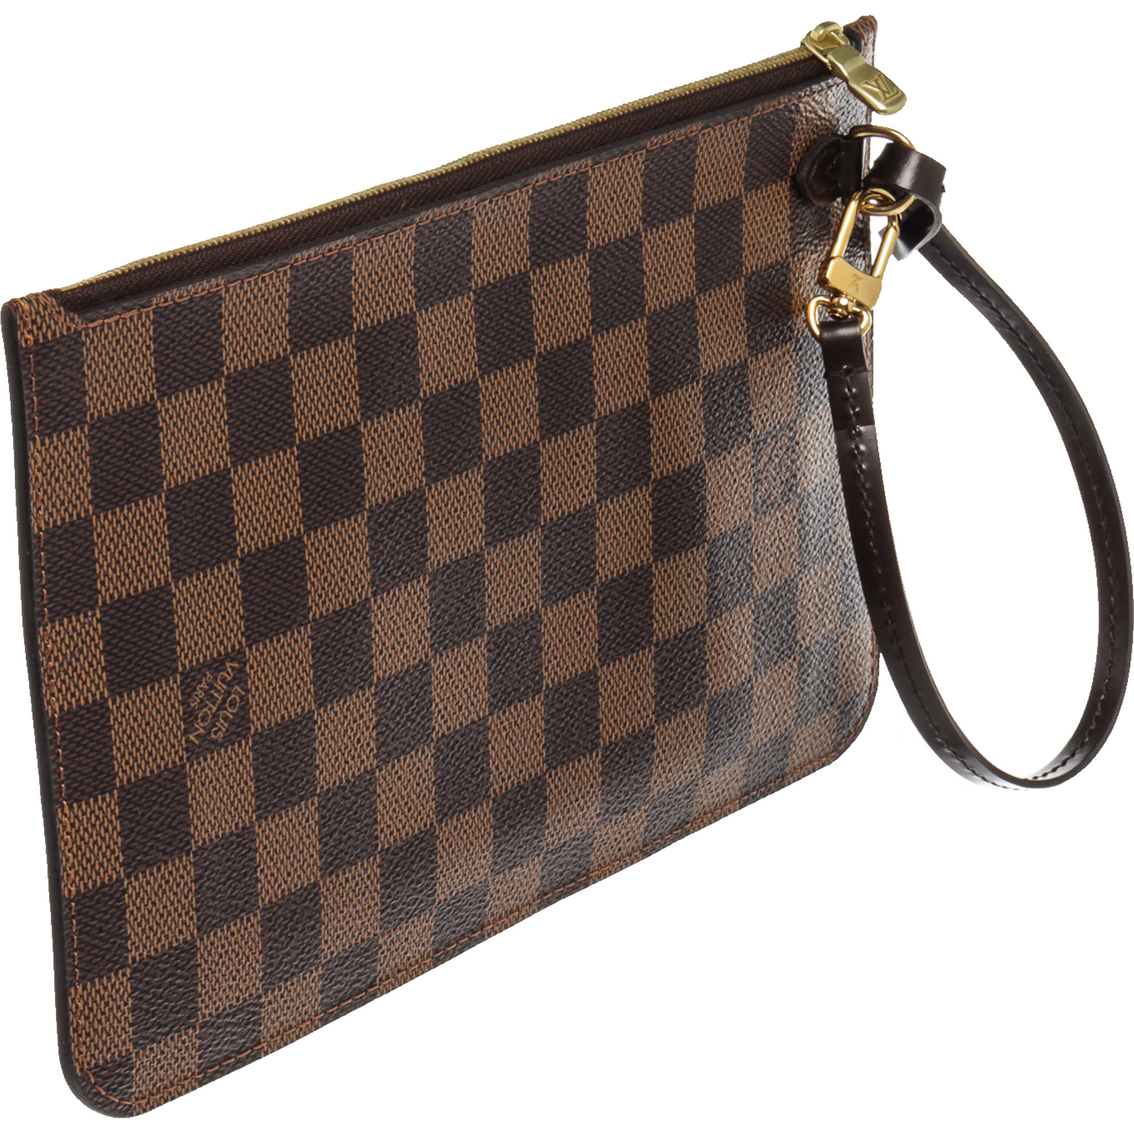 Louis Vuitton Nerverfull Pouch (Pre-Owned) - Image 3 of 8